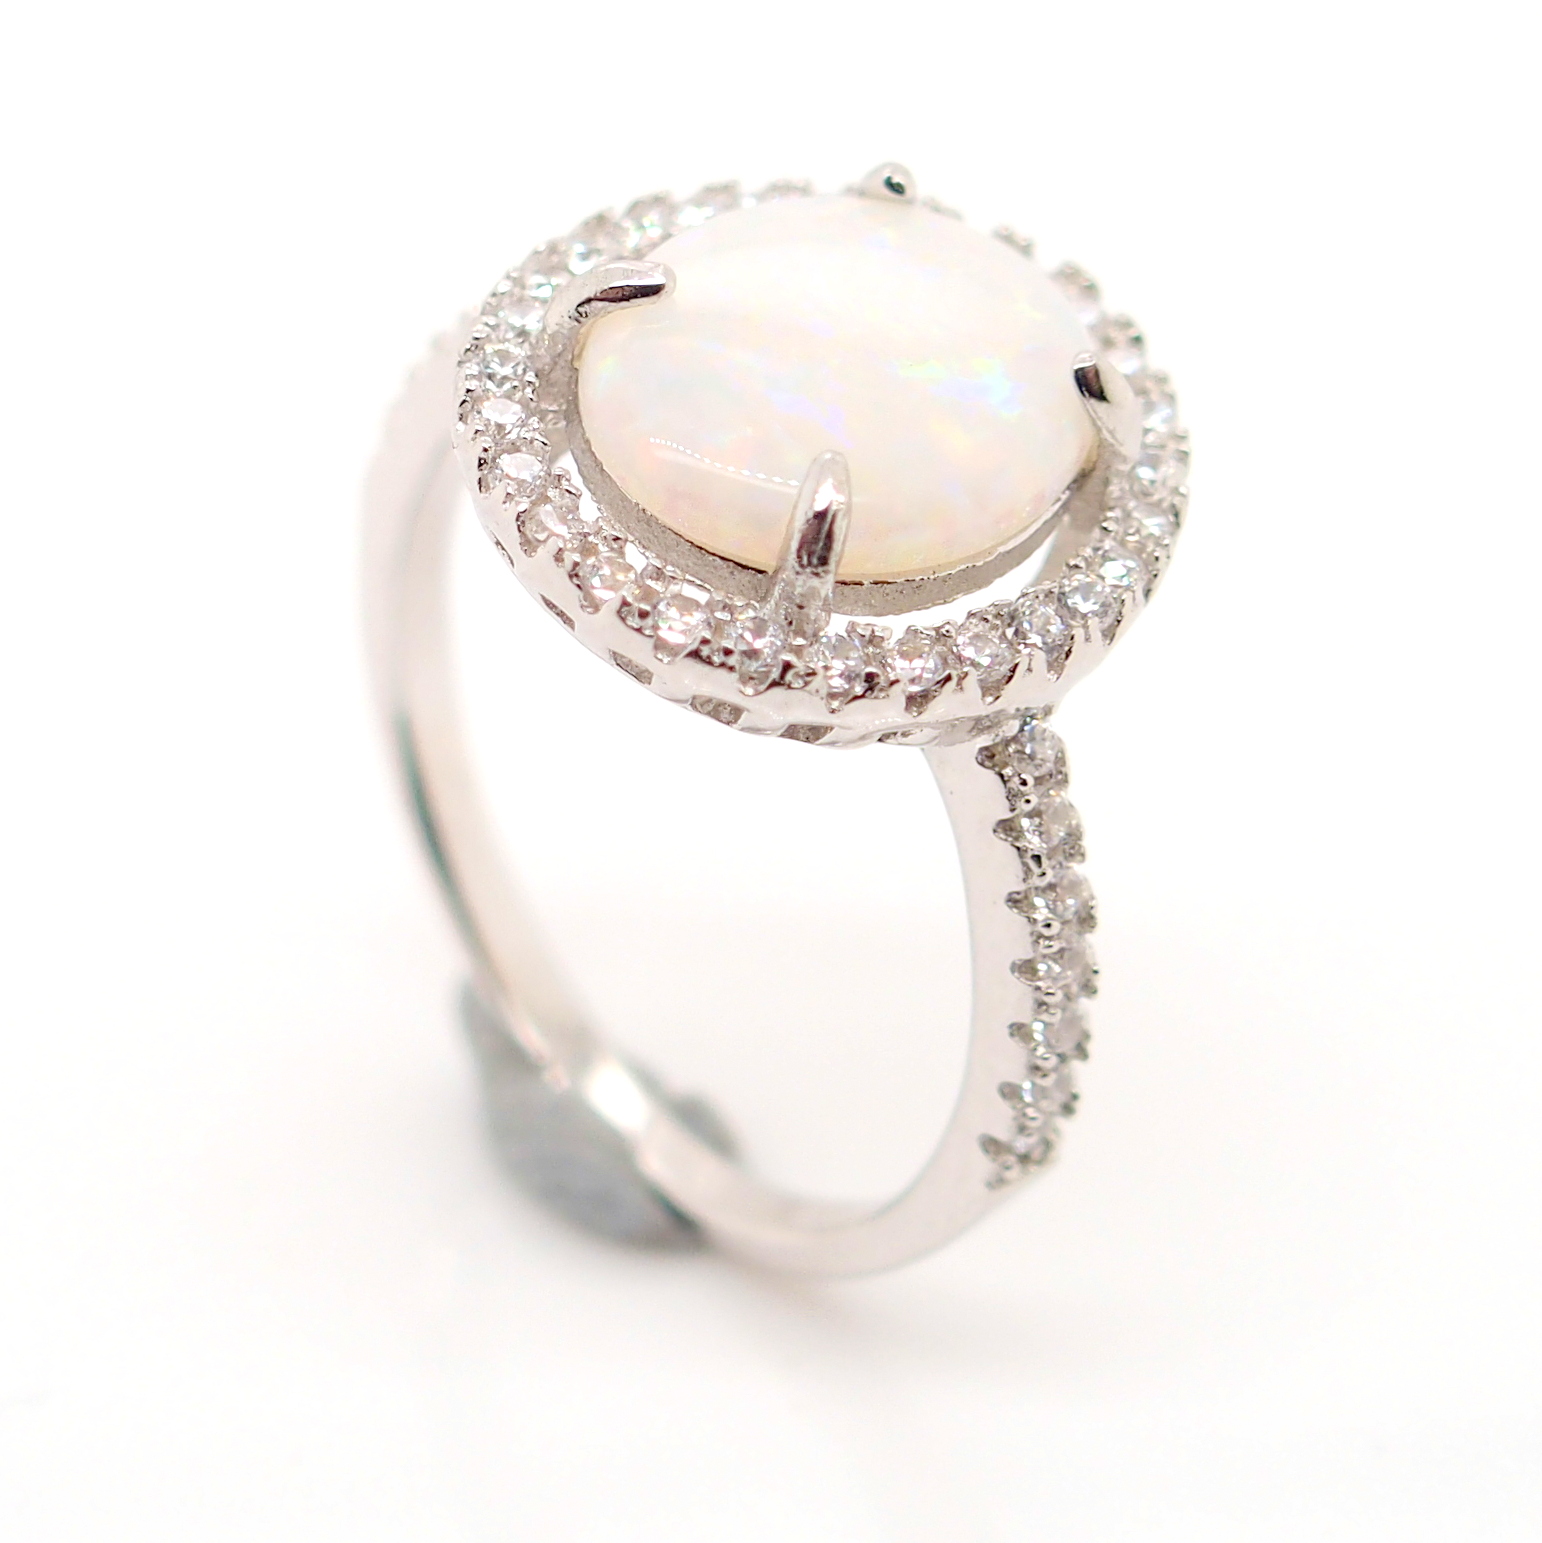 Solid White Opal Ring | Opals Down Under